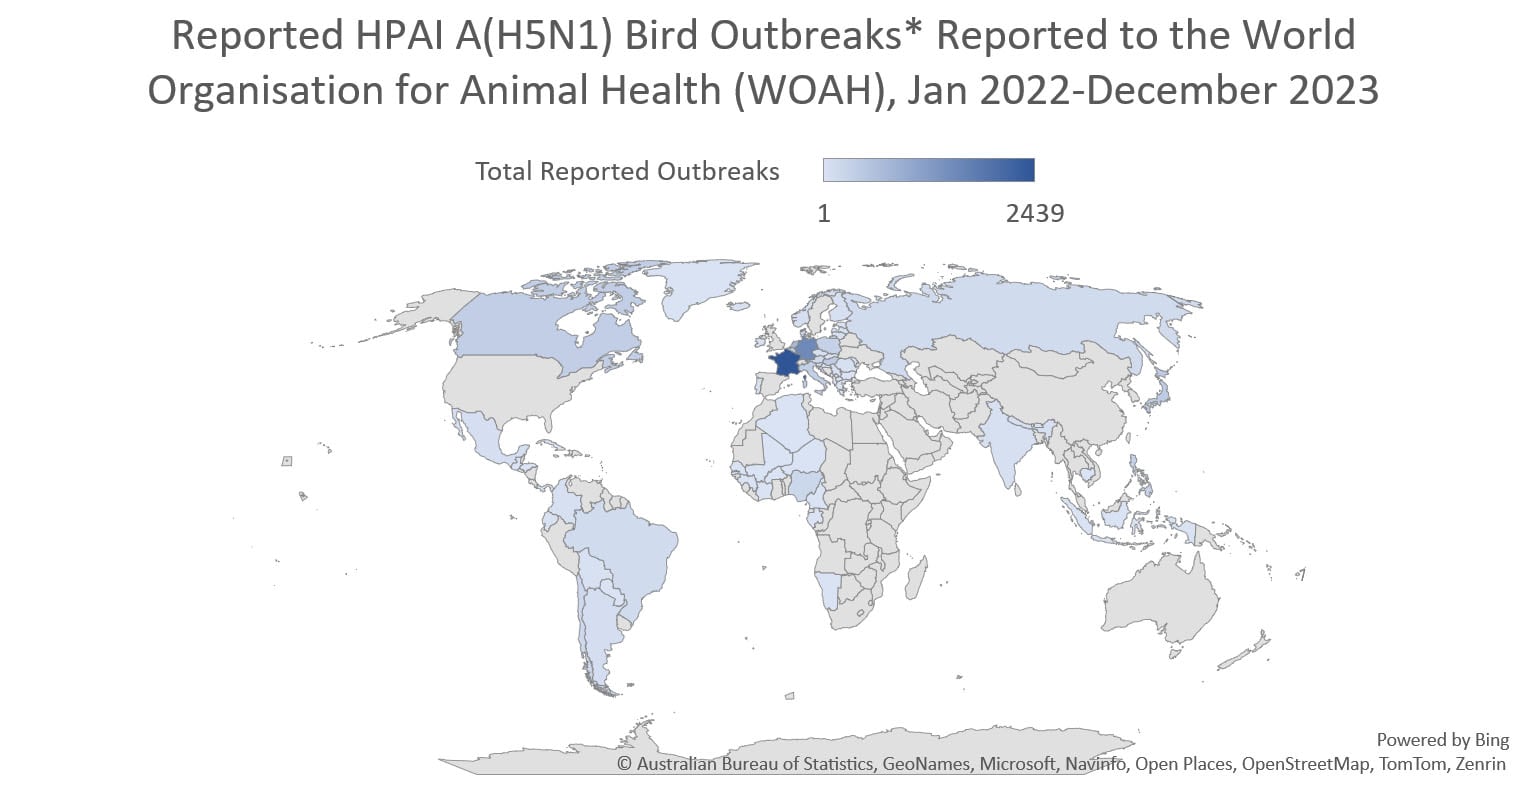 Reported HPAI A(H5N1) Bird Outbreaks* Reported to the World Organisation for Animal Health (WOAH), Jan 2022-December 2023